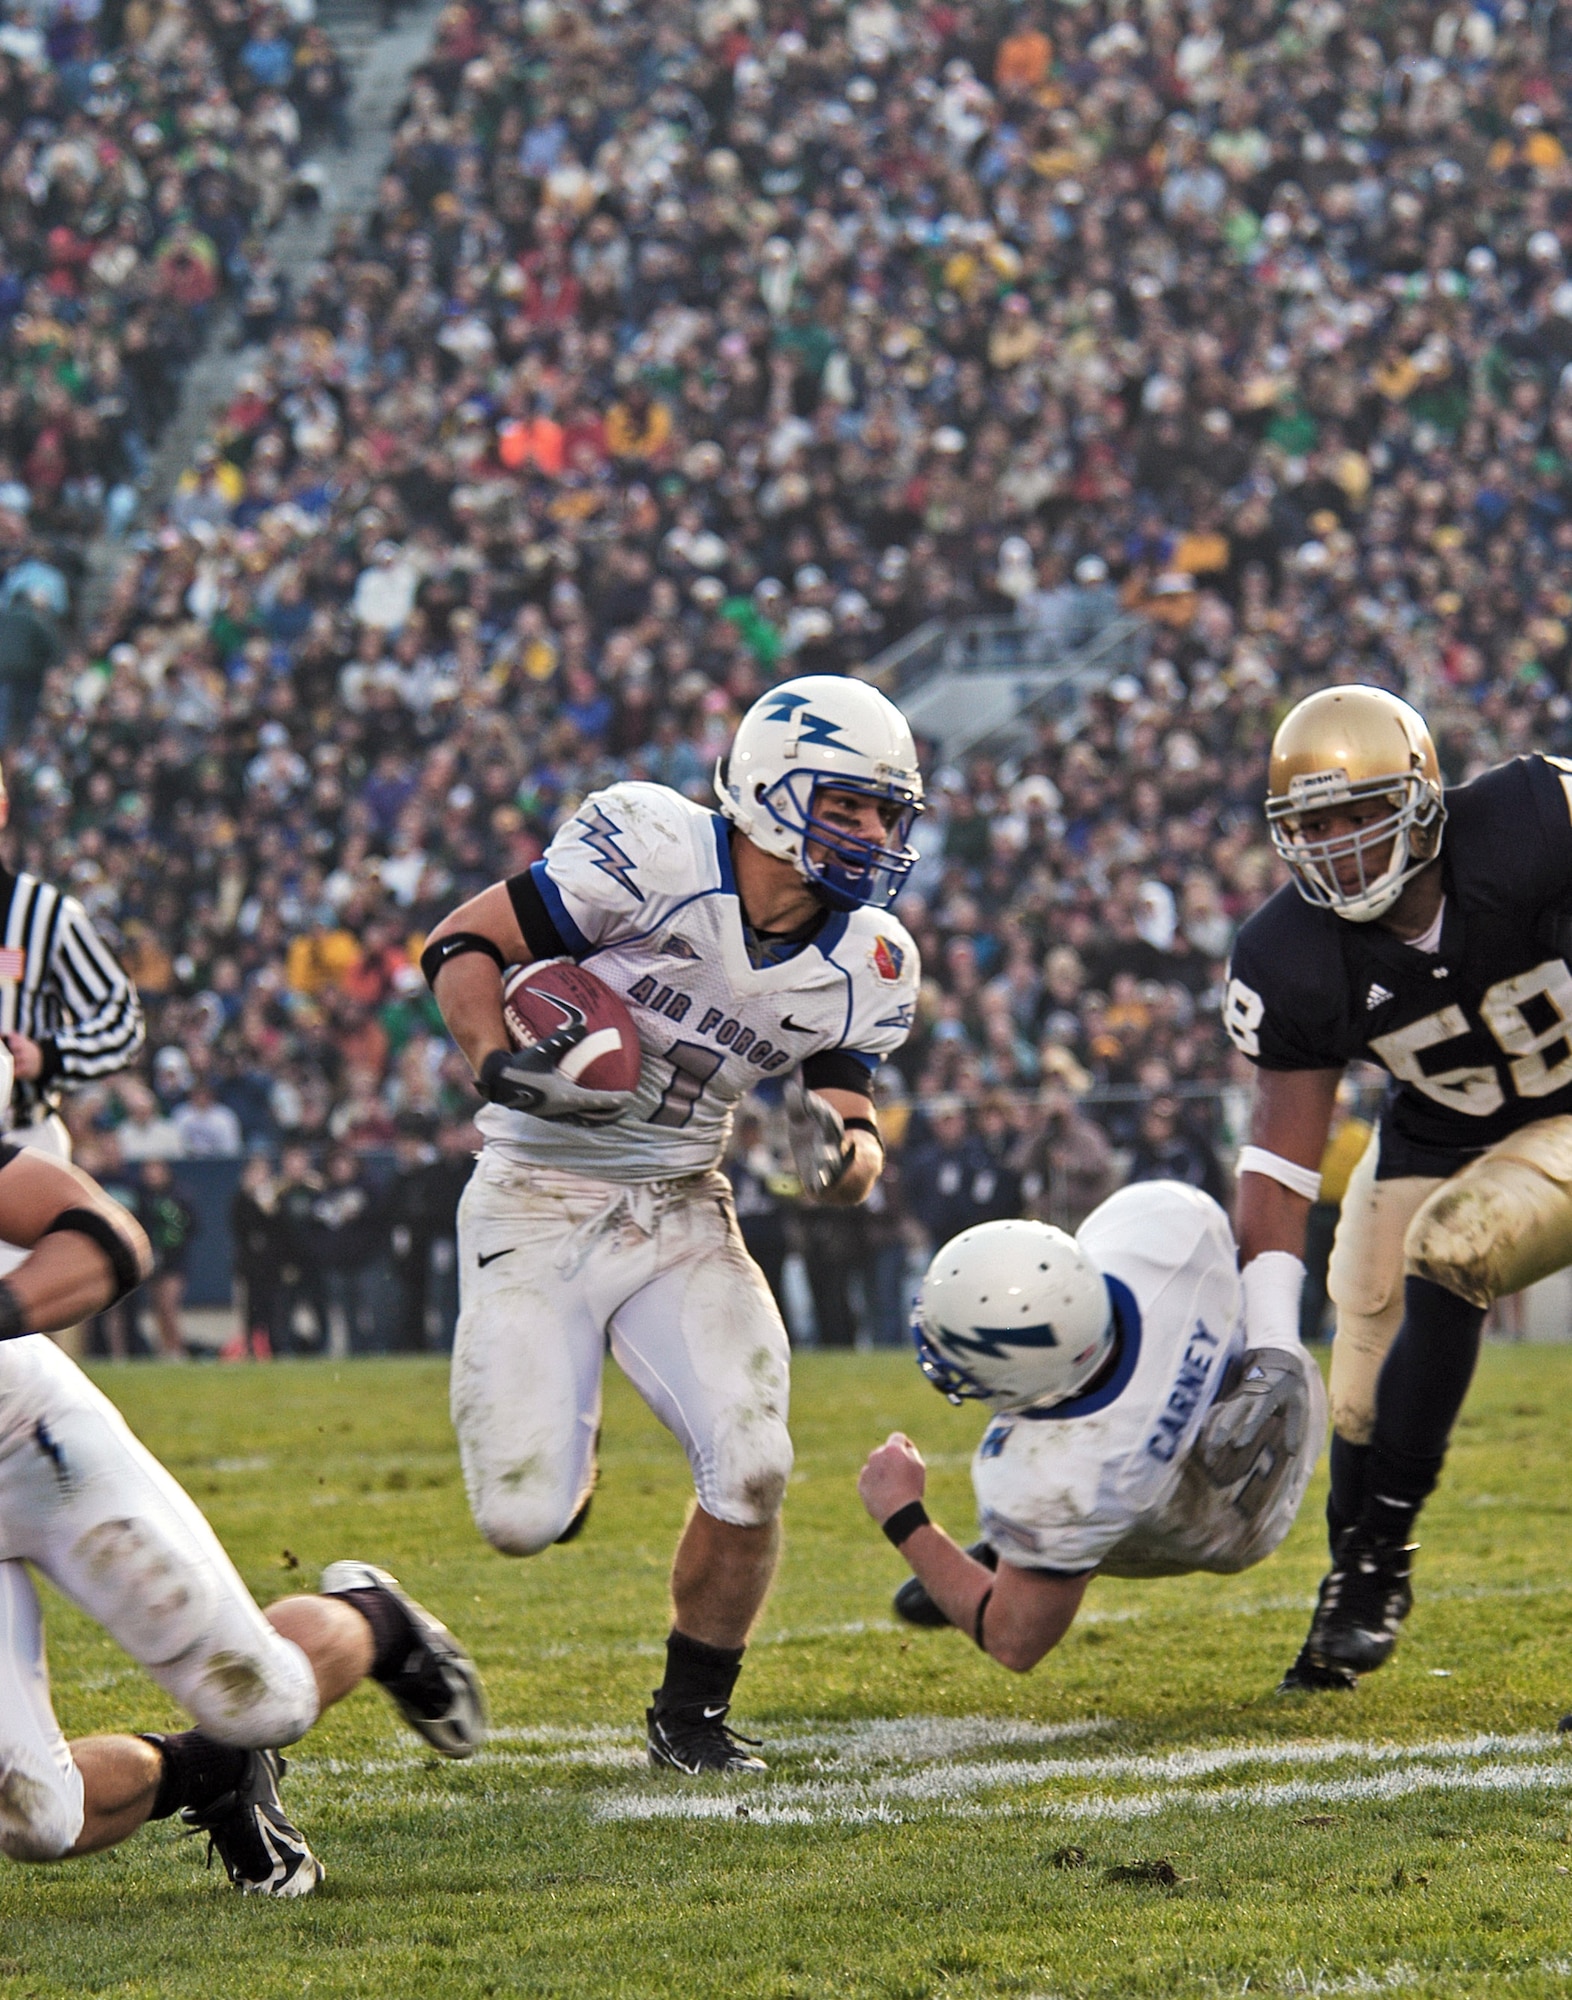 U.S. Air Force Academy Falcon z-back Chad Hall finds running room thanks to a block by quarterback Shaun Carney on Fighting Irish outside linebacker Brian Smith, 58, during Air Force's 41-24 win Nov. 10 at Notre Dame Stadium in Indiana. Hall carried a game-high 32 times for 142 yards, an average of 4.4 yards per carry (U.S. Air Force photo/Staff Sgt. Monte Volk) 
